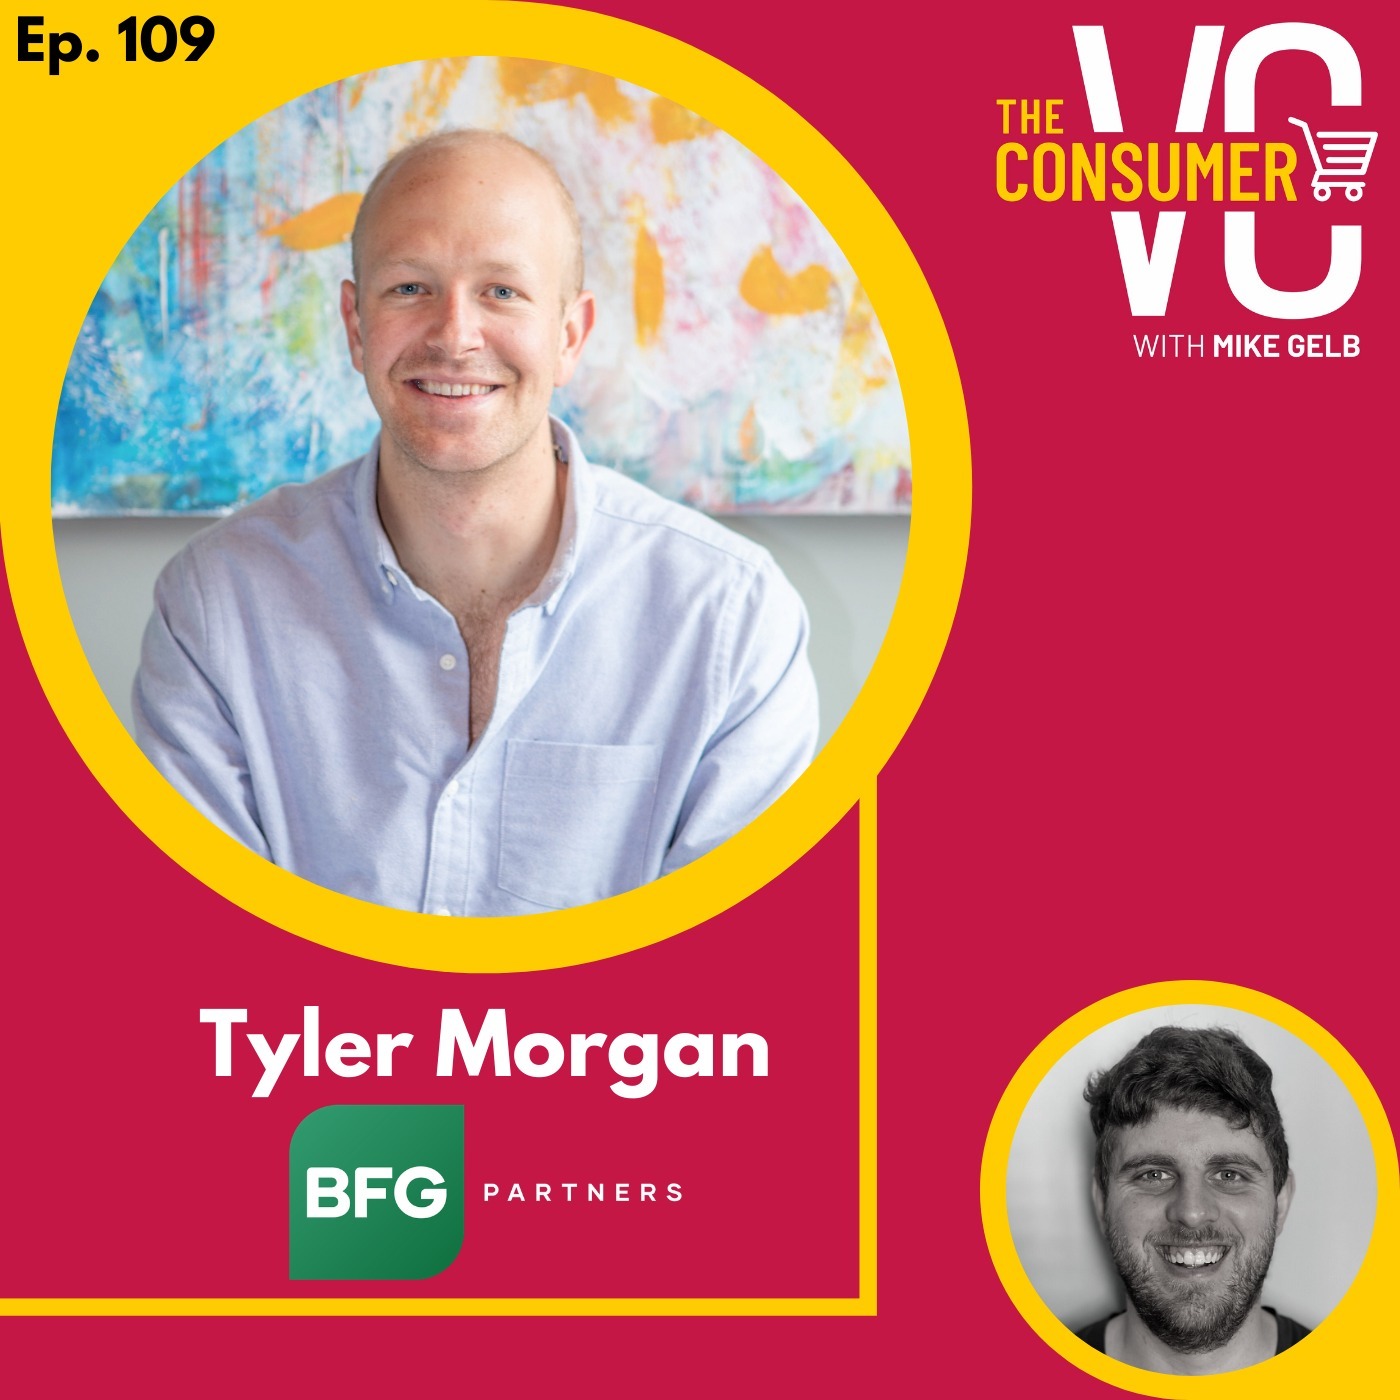 Tyler Morgan (BFG Partners): How His Passion for Health & Wellness Led Him Into CPG, Changes During COVID, and The Evolution of BFG